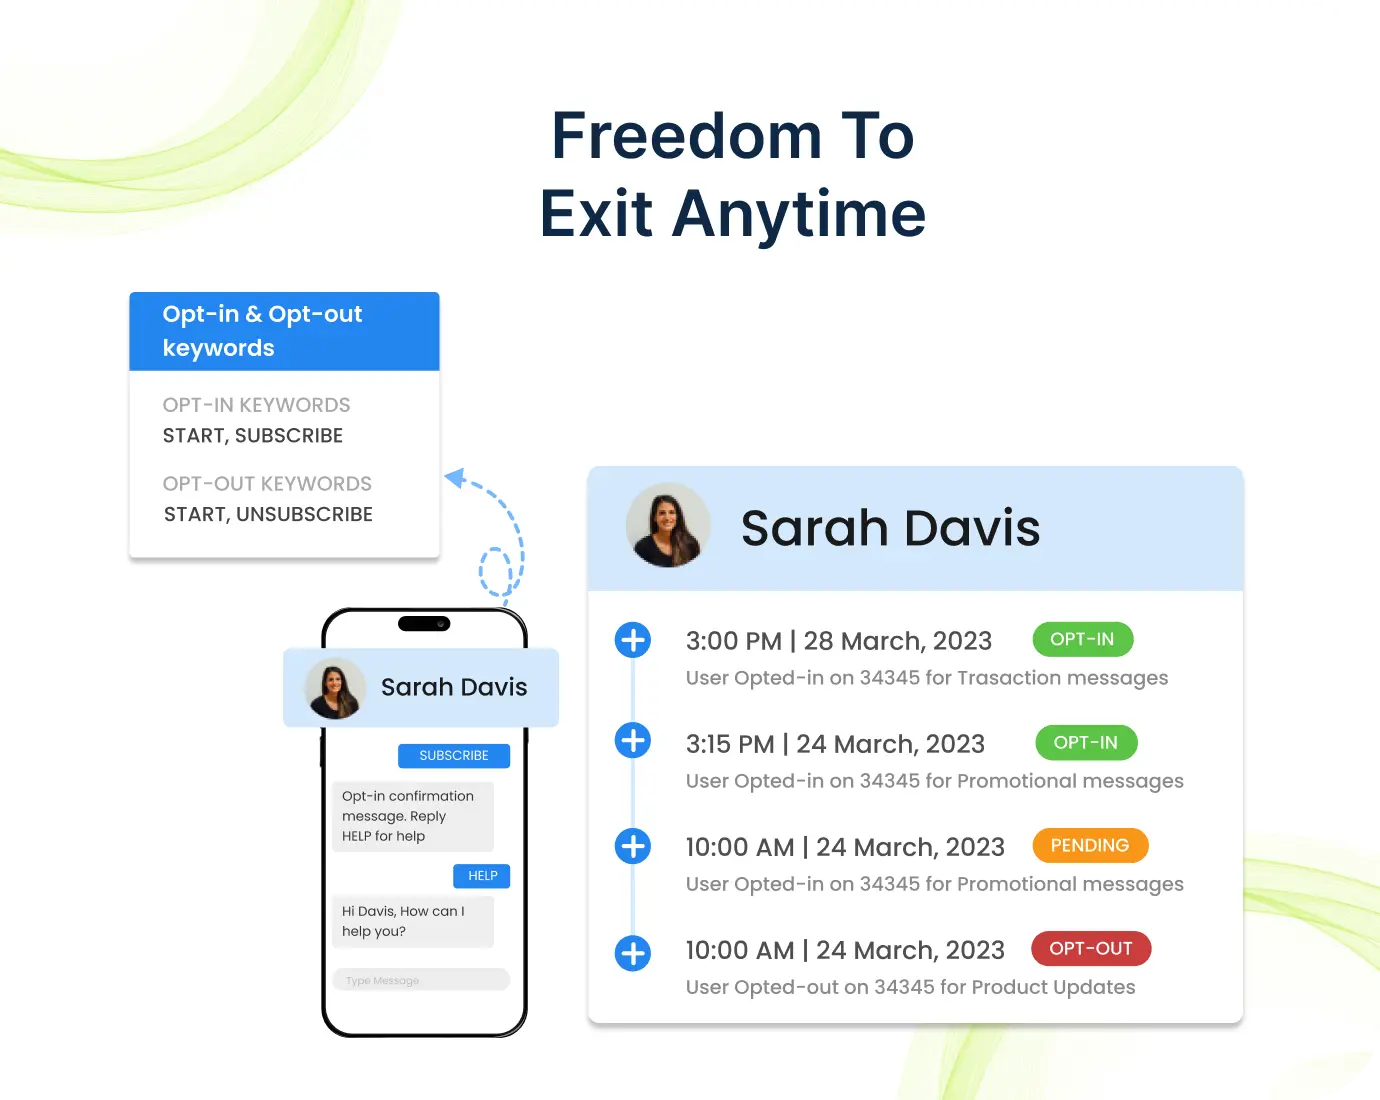 Freedom to Exit Anytime